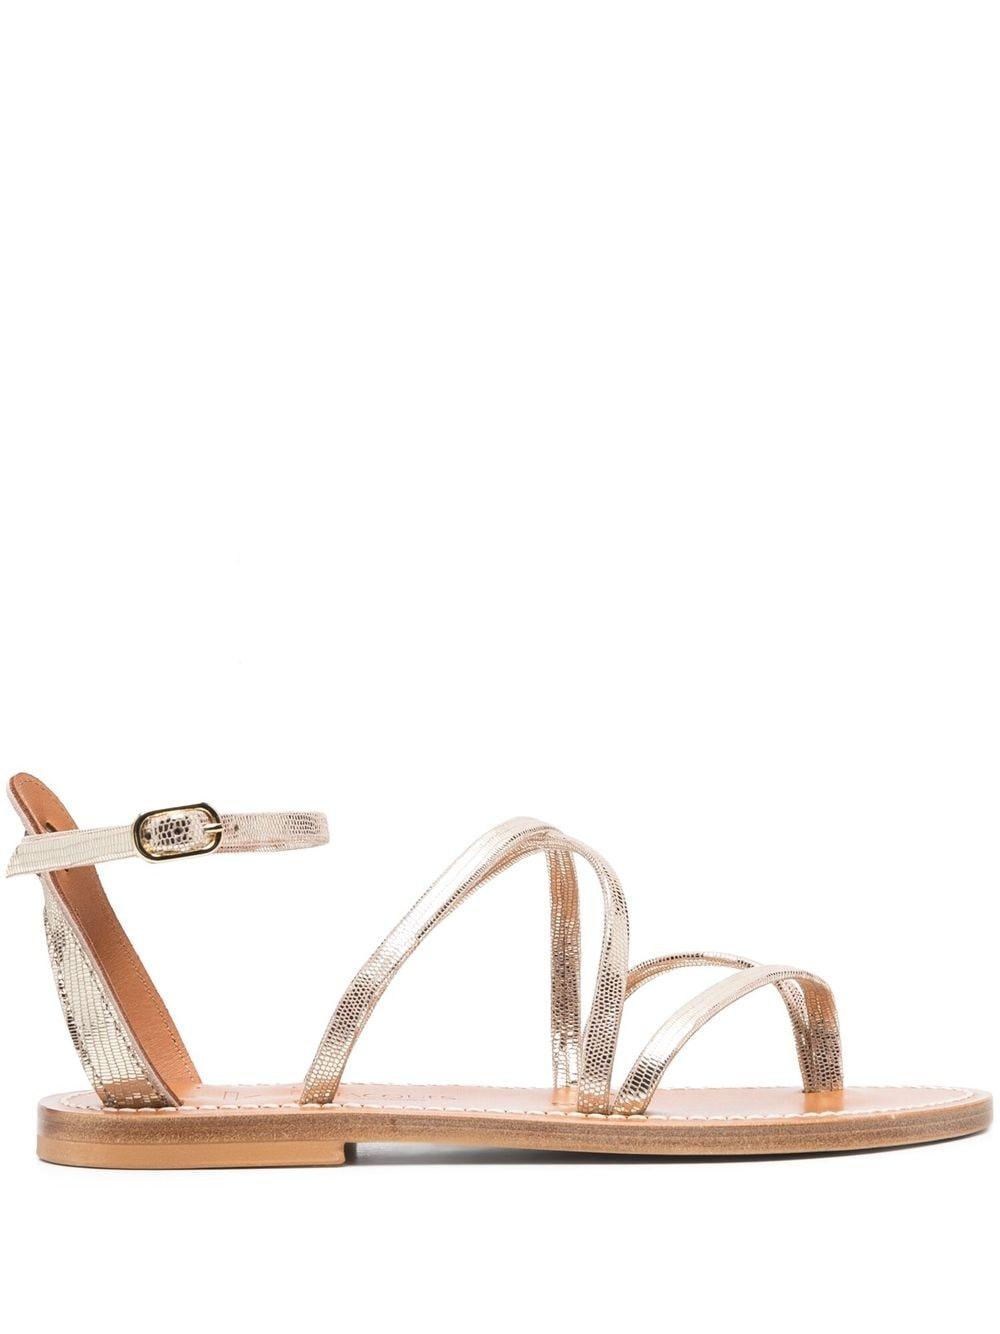 K. Jacques Epicure Patent-leather Sandals in Metallic | Lyst